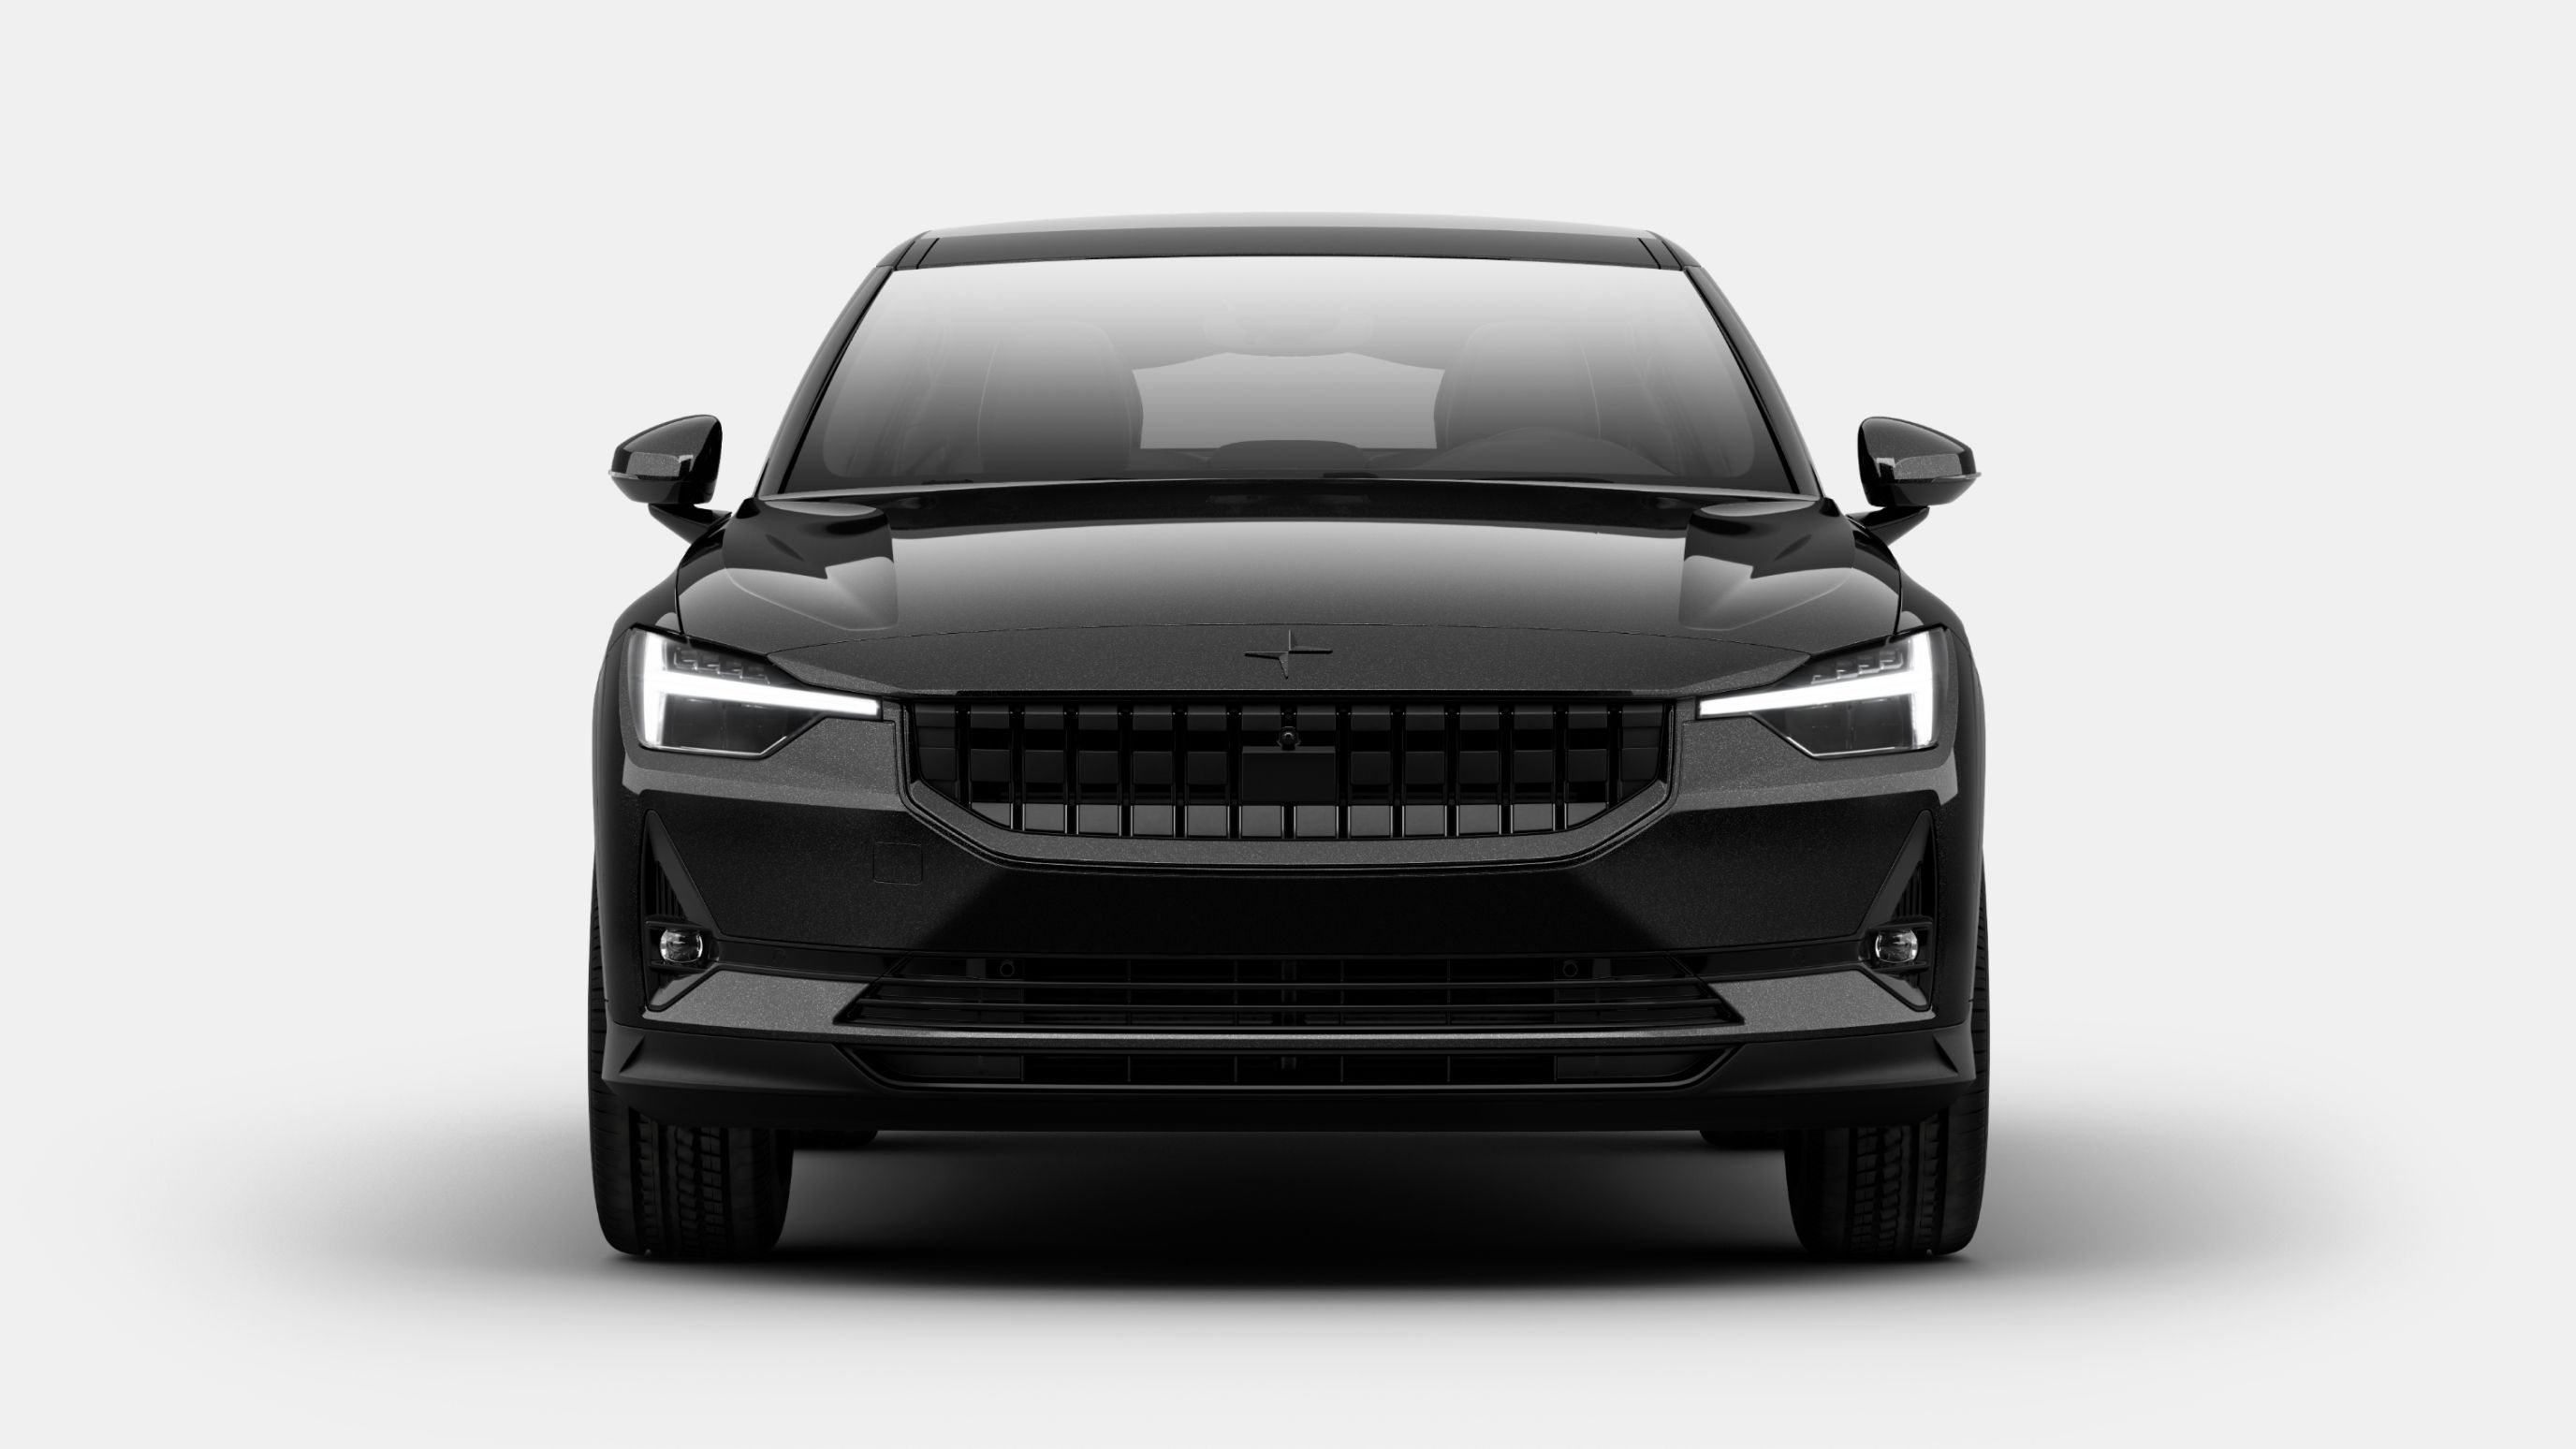 Front view of a black Polestar 2 